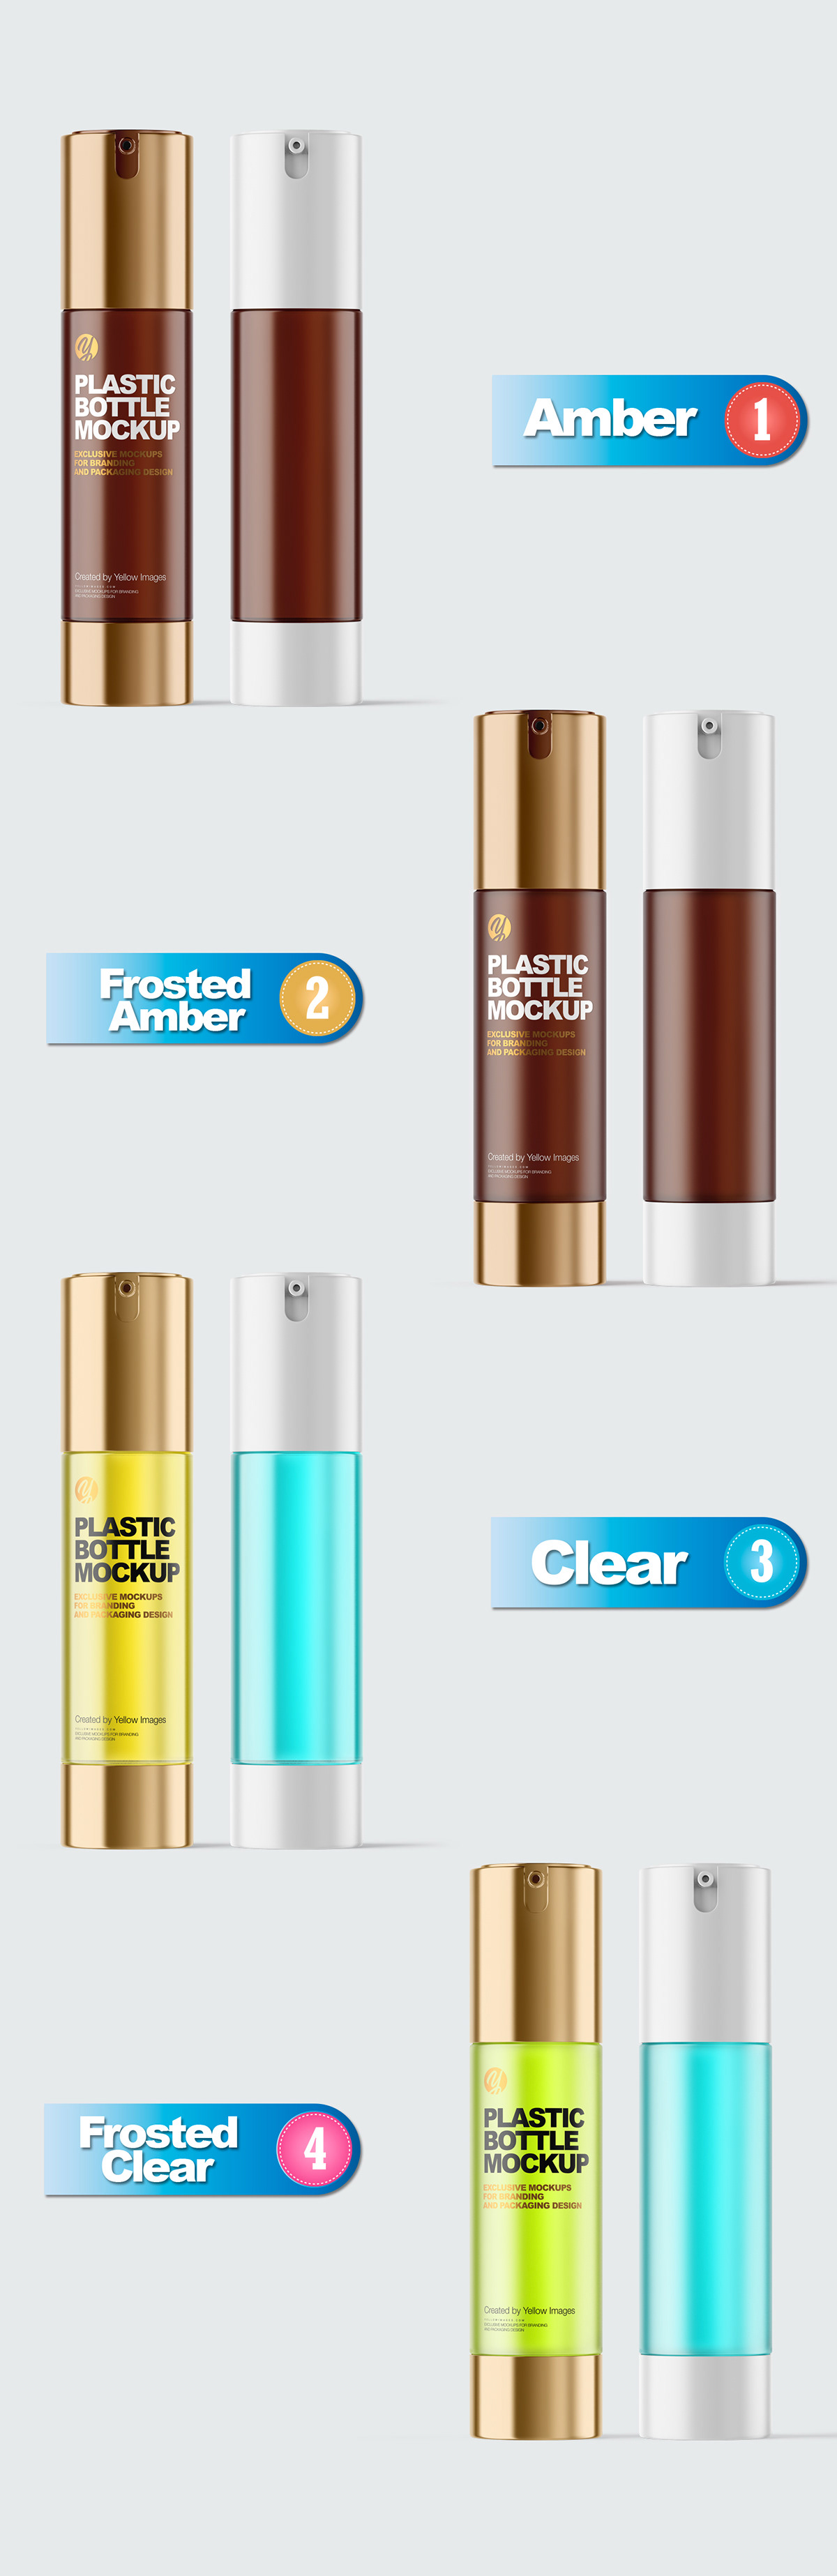 Download Airless Cosmetic Bottles Mockups On Student Show Yellowimages Mockups